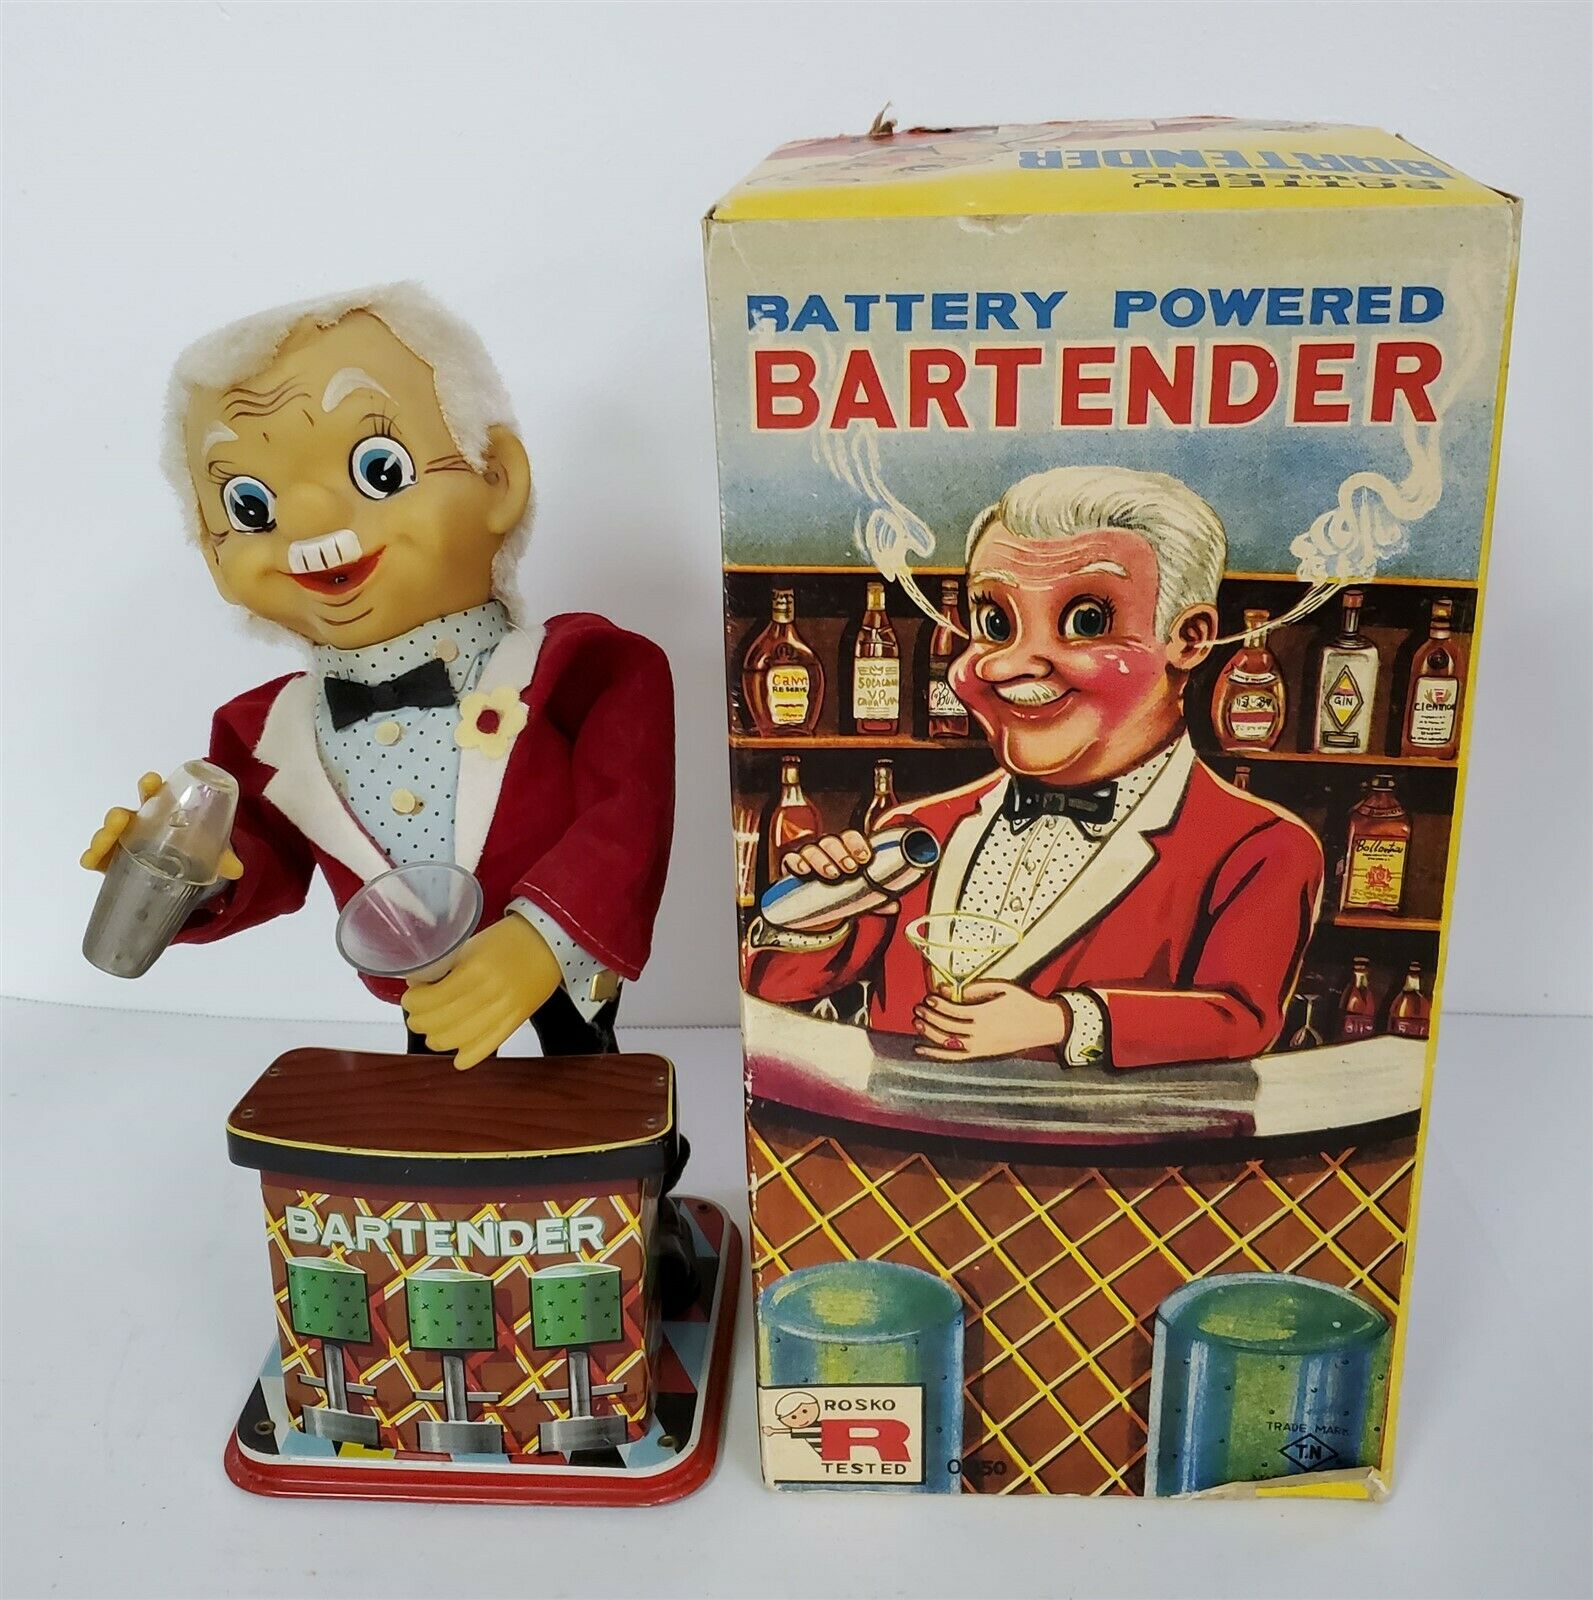 B295 Vintage 60's Tn Toys Battery Operated Bartender W/ Orig. Box Working!